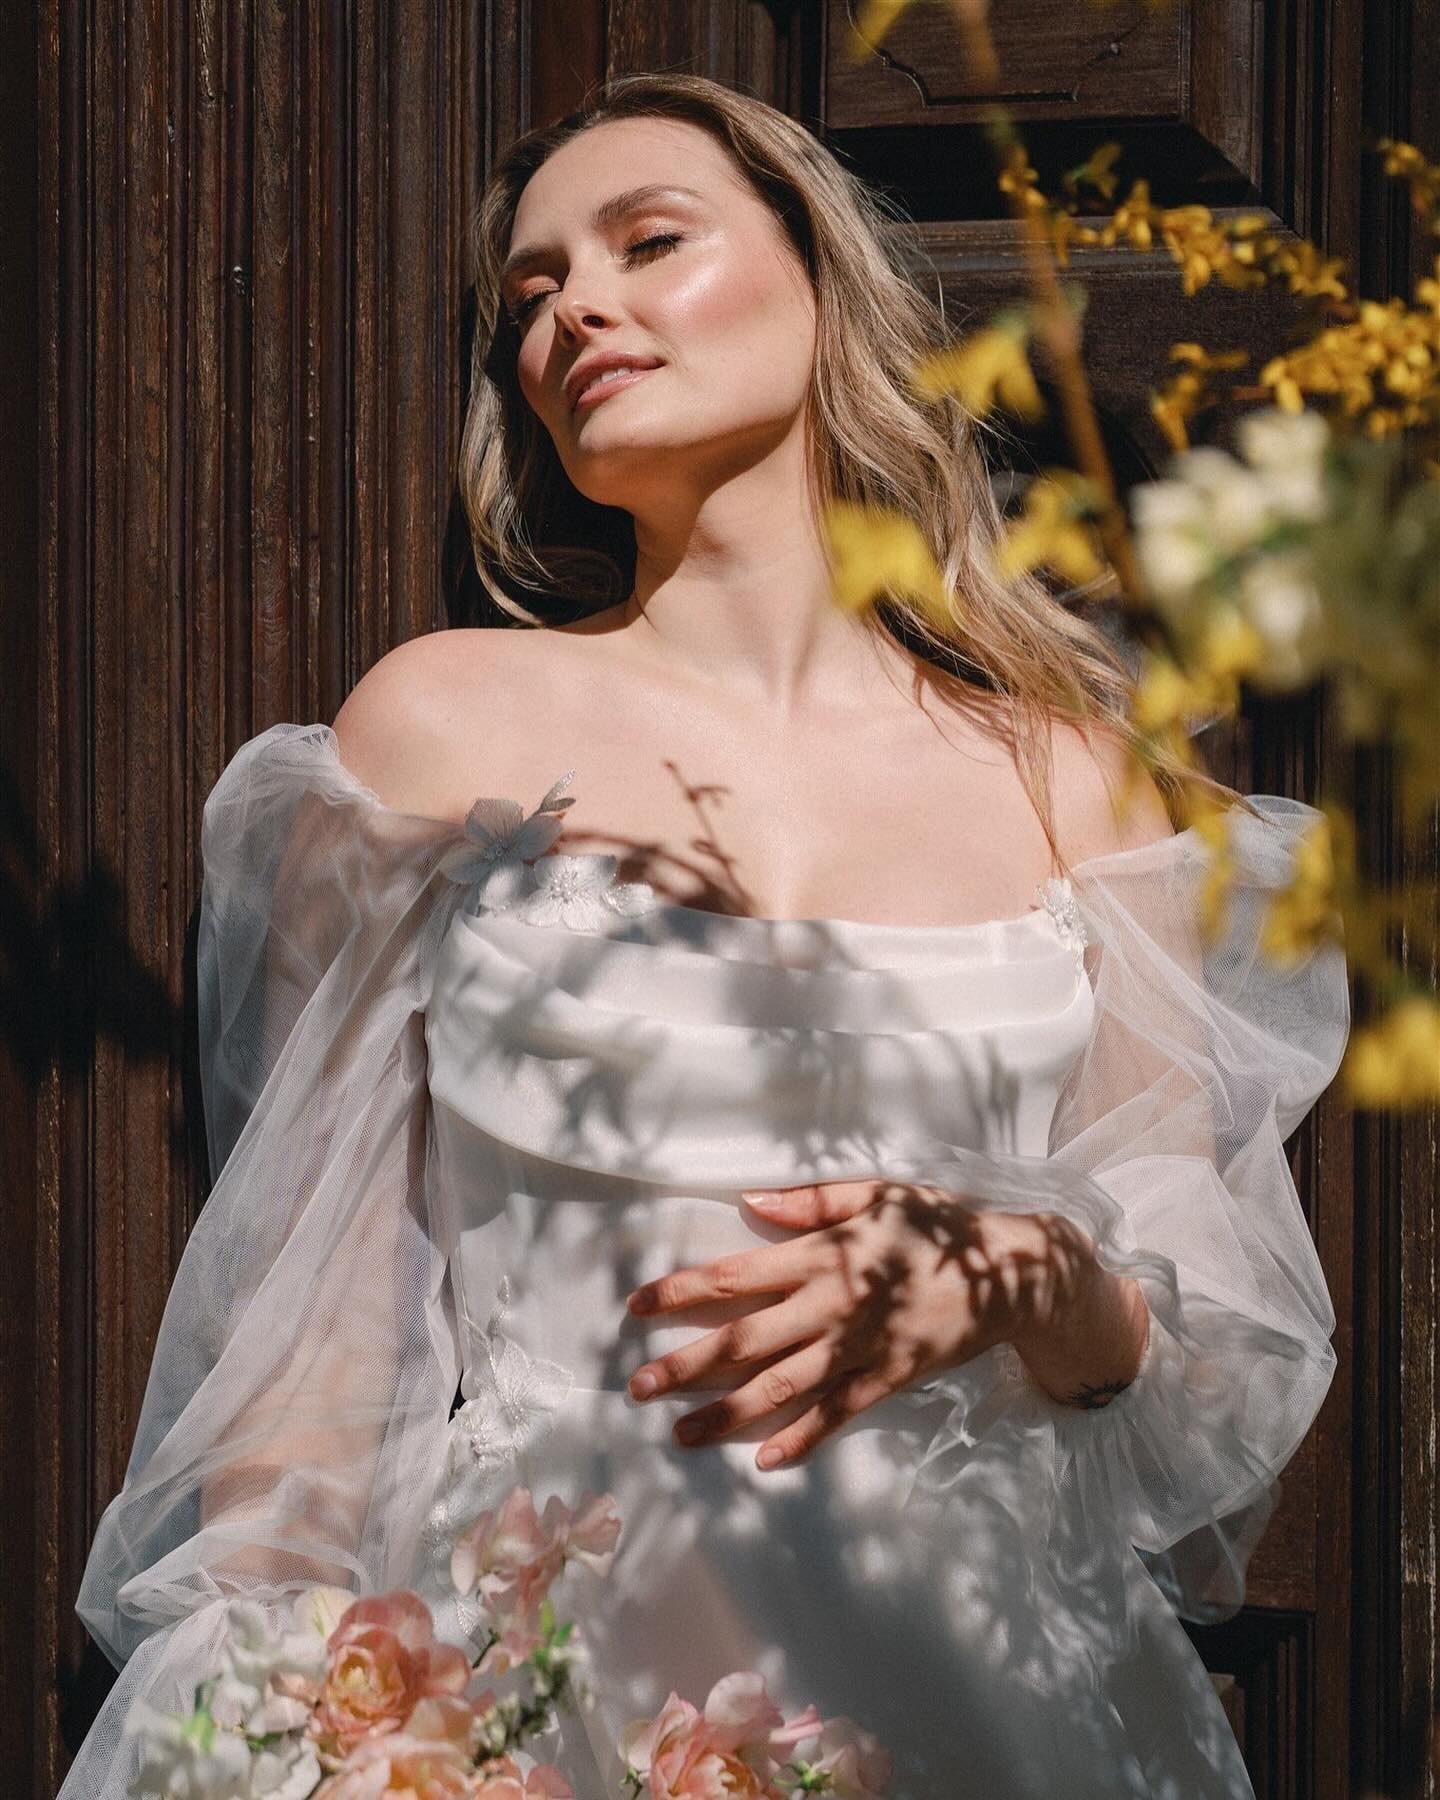 Shadow play ✨ Reverdie Quebec gallery is dropping tonight! What are you most excited to see?

Workshop Hosts @trillefloral @winsomefloral
Photographer @graceandardor
Planner @elegantproductions
Venue @chateaustagnes
Custom Gown @pearlebykatrinatuttle